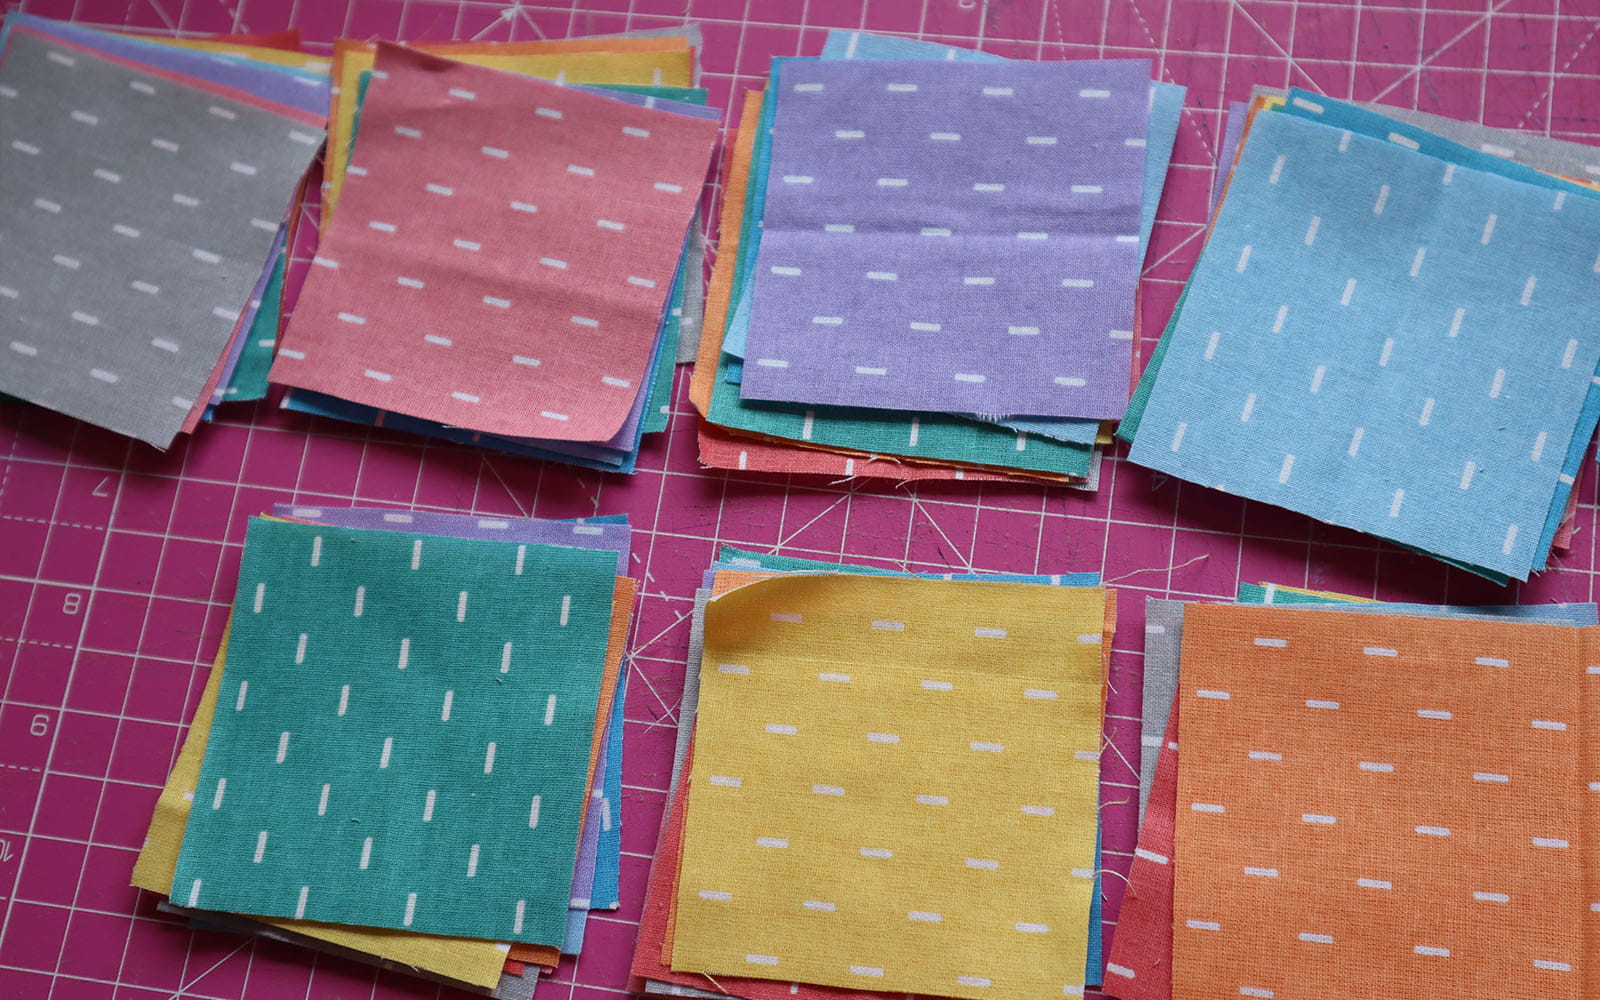 Seven stacks of sorted coloured fabric squares on pink cutting mat